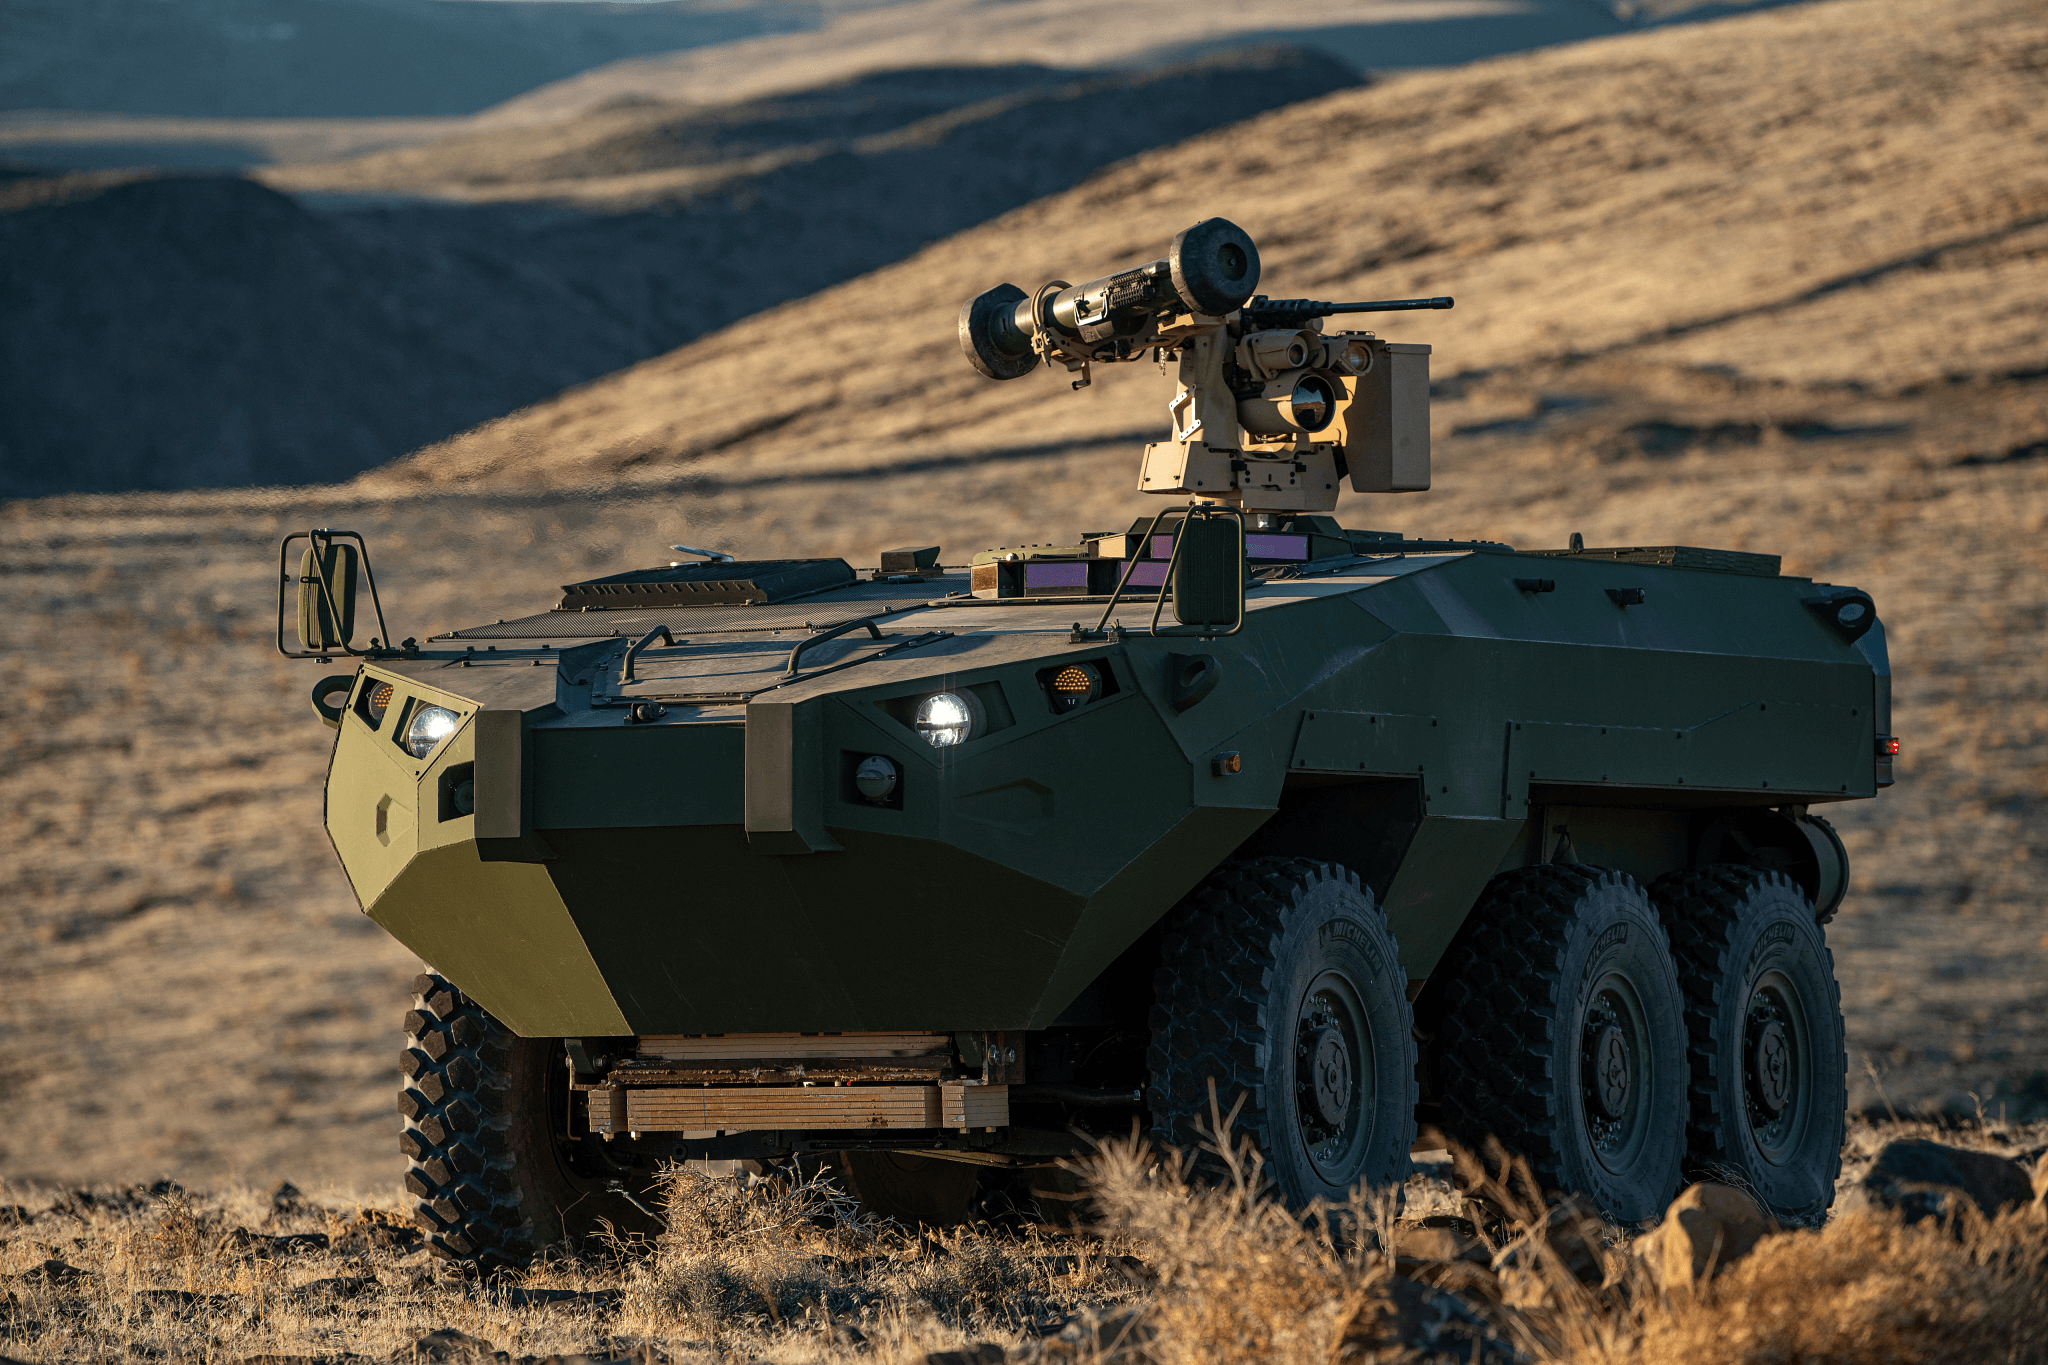 GDLS will Deliver the Latest version of the 8X8 ARV to the USMC